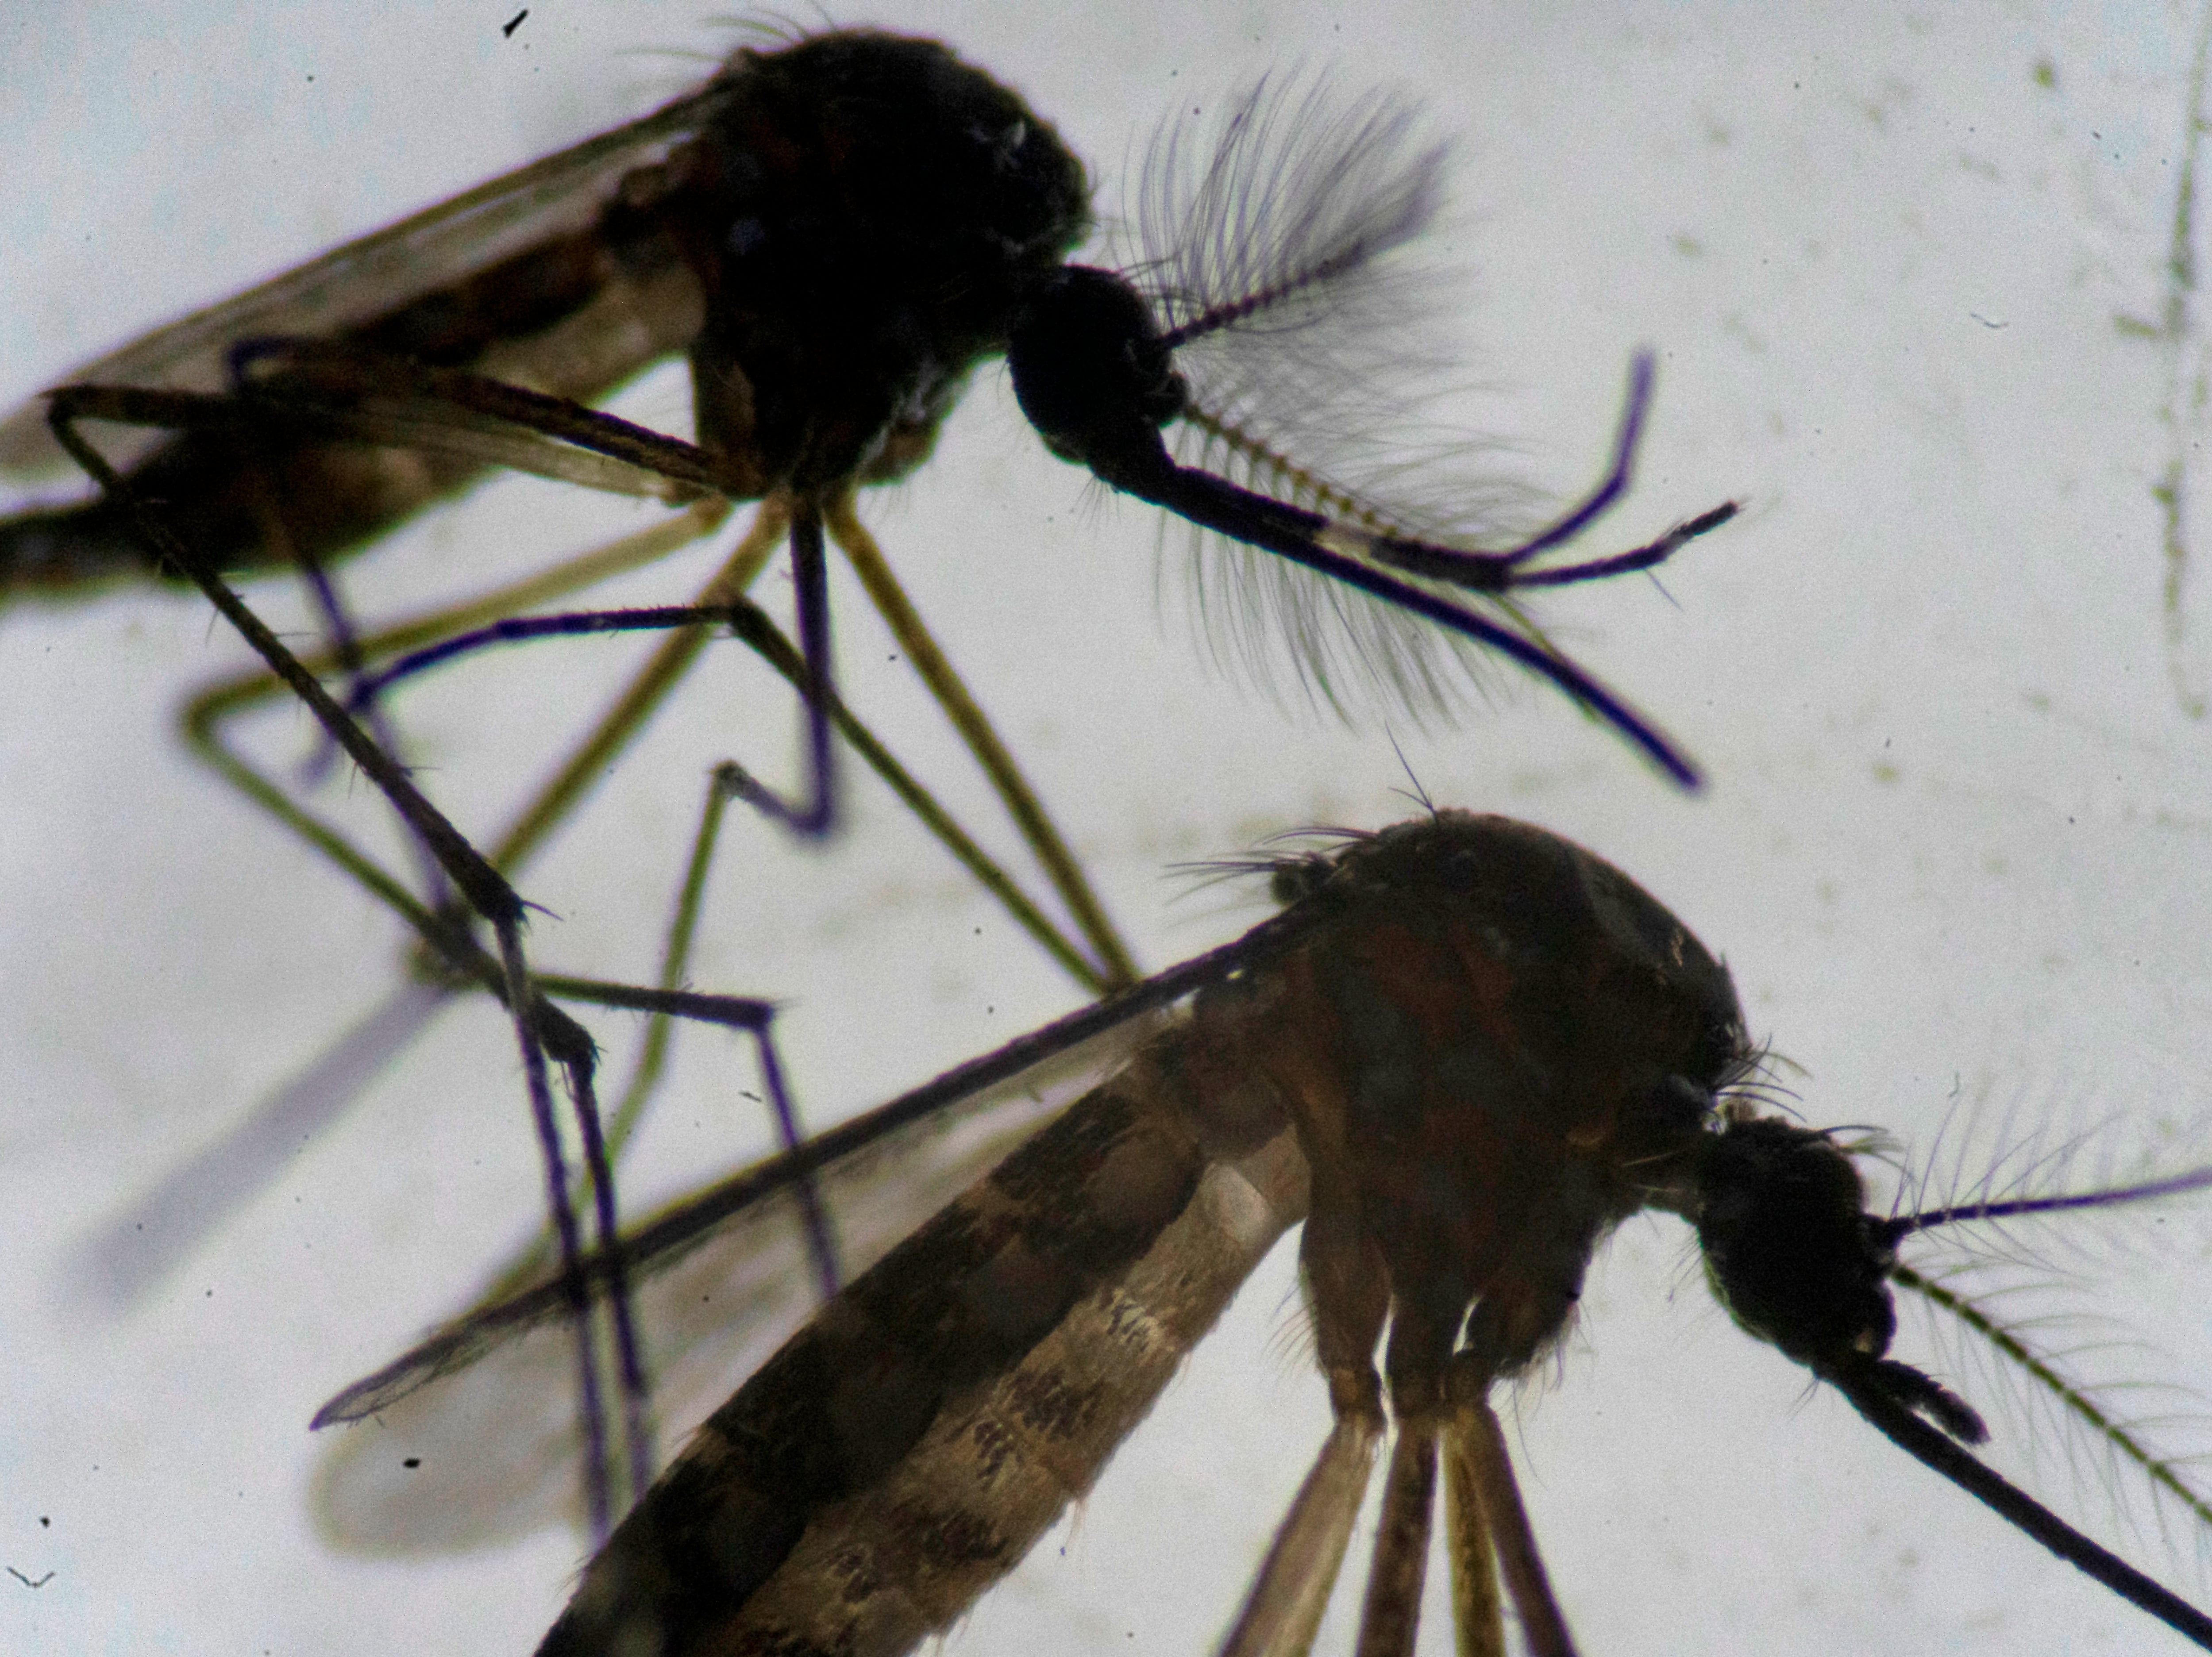 A male (top) and a female (bottom) Aedes aegypti mosquitos are seen through a microscope at the Oswaldo Cruz Foundation laboratory in Rio de Janeiro, Brazil, on 14 August 2019